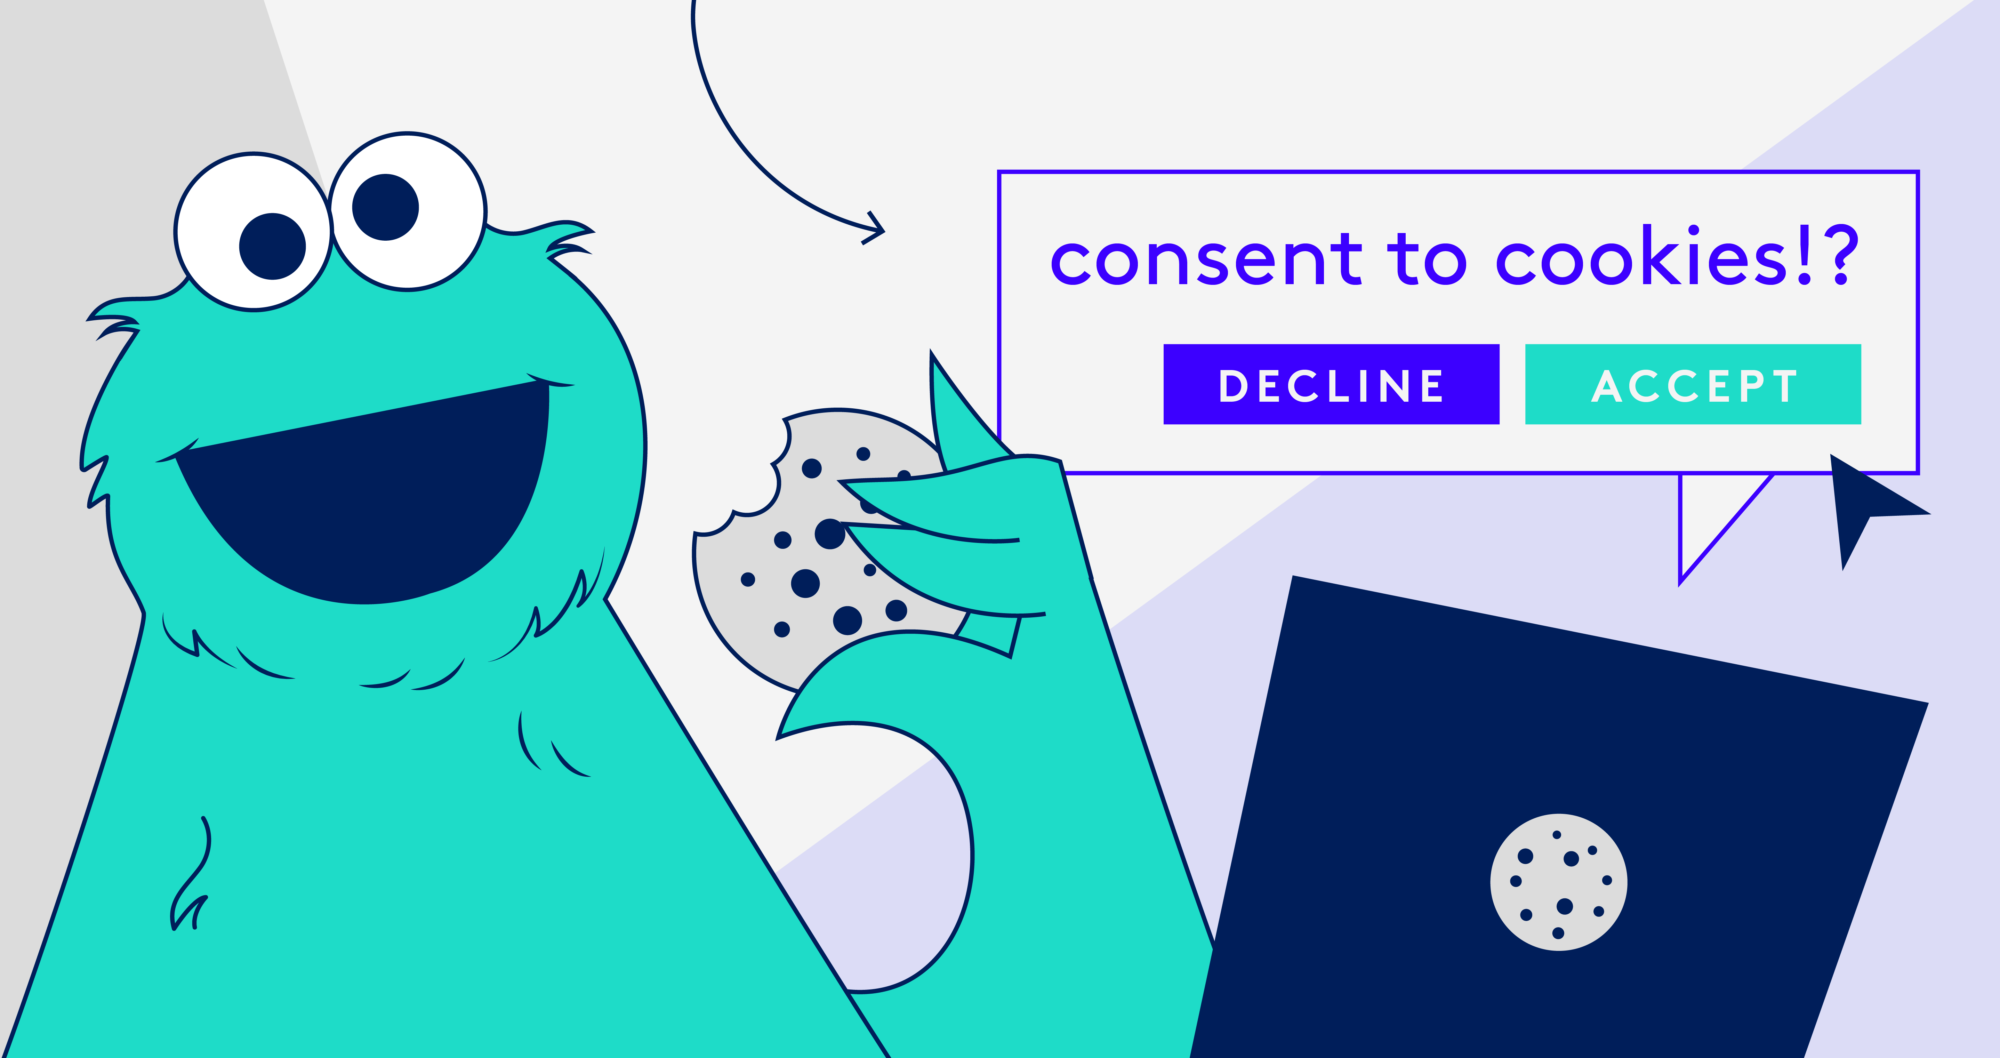 Cartoon Header Image showing a teal cookie monster character on the right eating a cookie with a box to the right stating "Consent to Cookies!?" with Decline and Accept buttons.